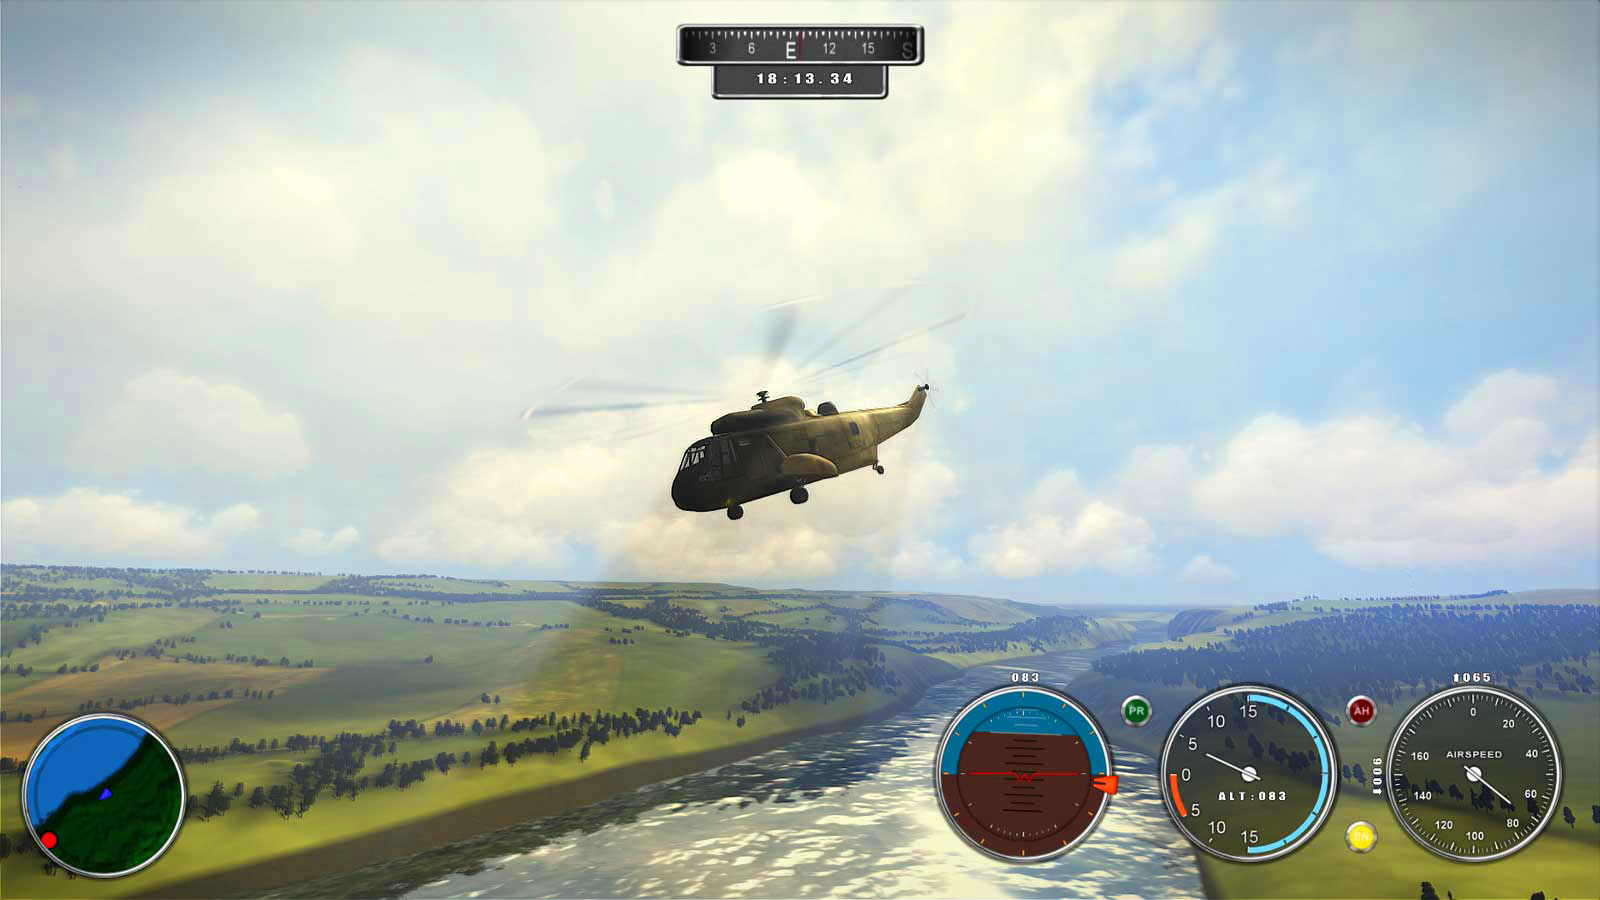 rc helicopter simulator torrent